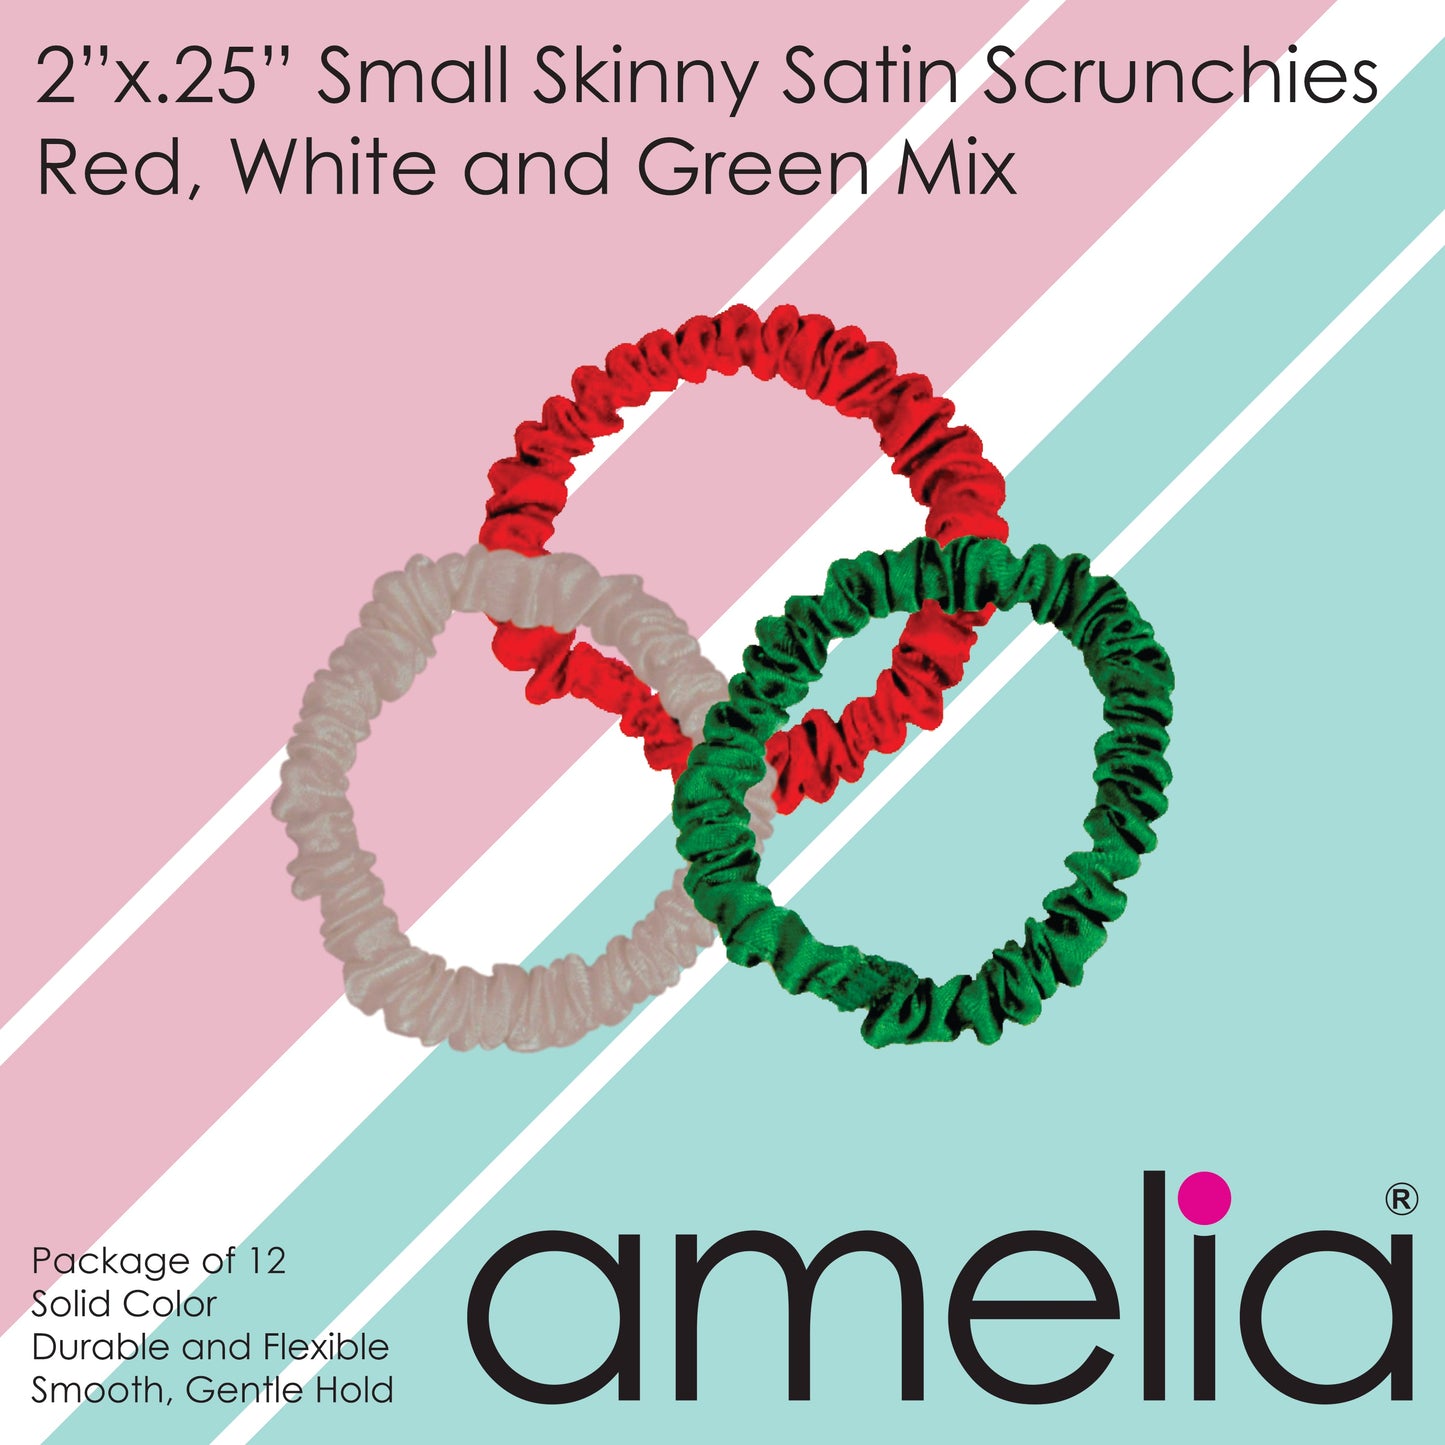 Amelia Beauty, Red, White and Green Mix Skinny Satin Scrunchies, 2in Diameter, Gentle and Strong Hold, No Snag, No Dents or Creases. 12 Pack - 12 Retail Packs